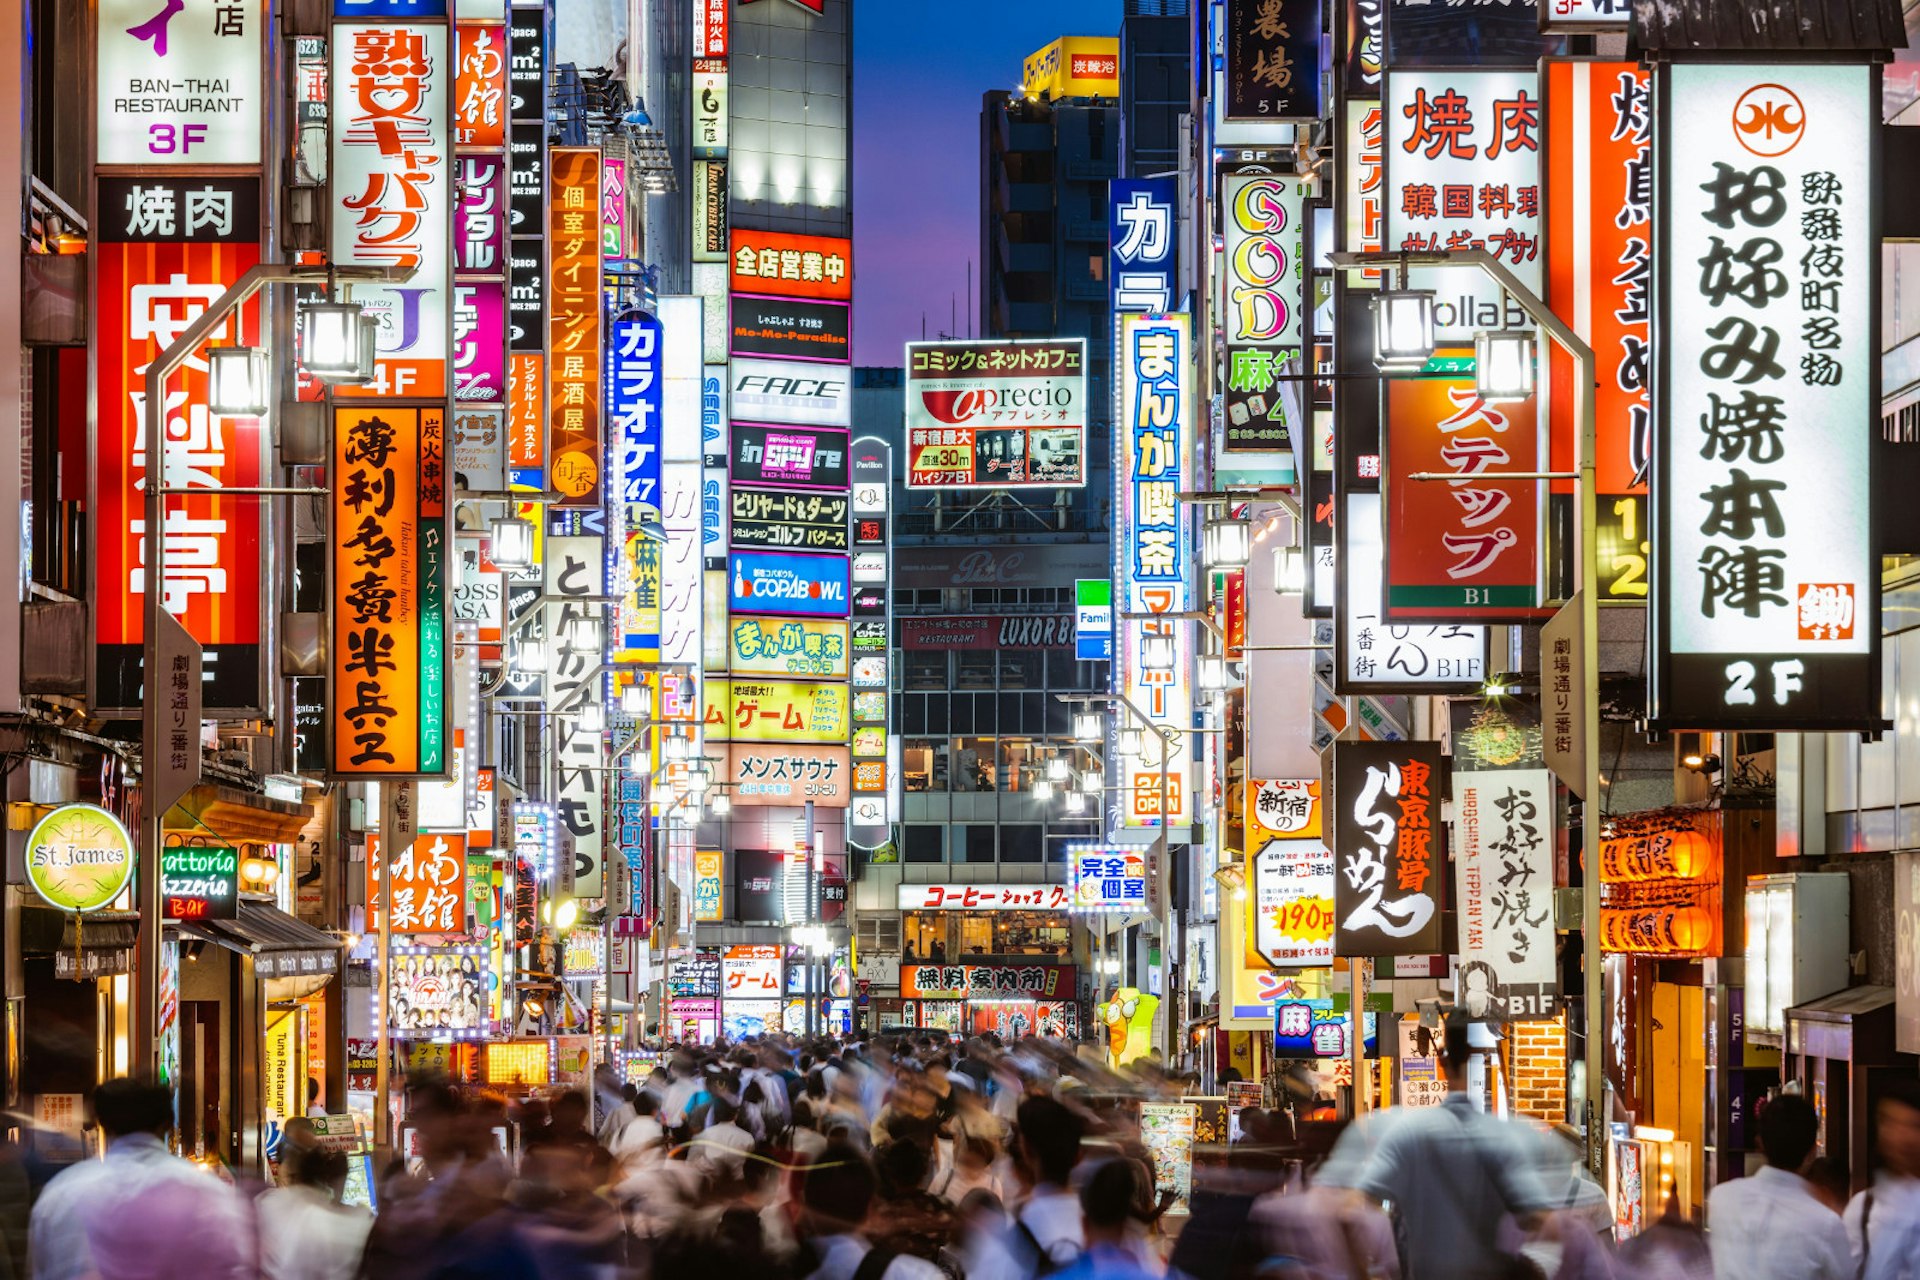 The bustling Tokyo neighbourhood of Shinjuku at night; a huge crowd of people walk under a mass of neon-lit signs in Japanese script.